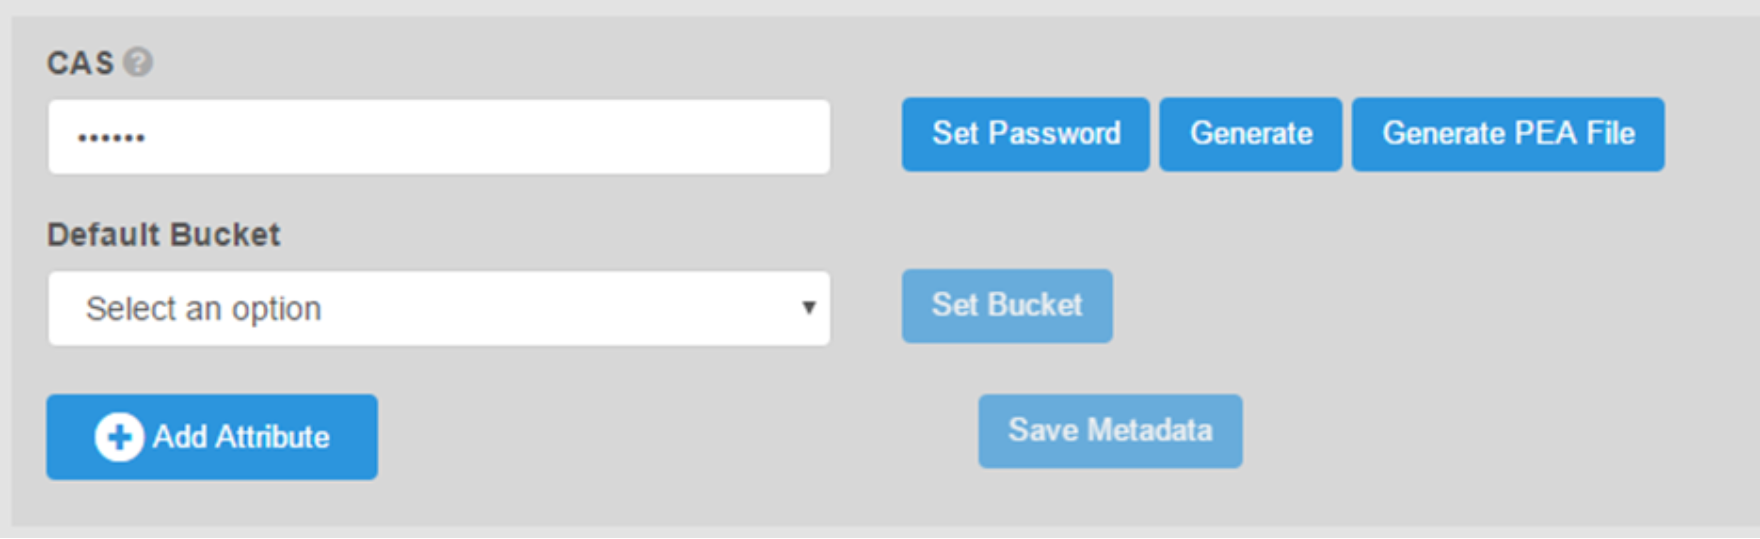 Shows the input prompt for the CAS default bucket radio button